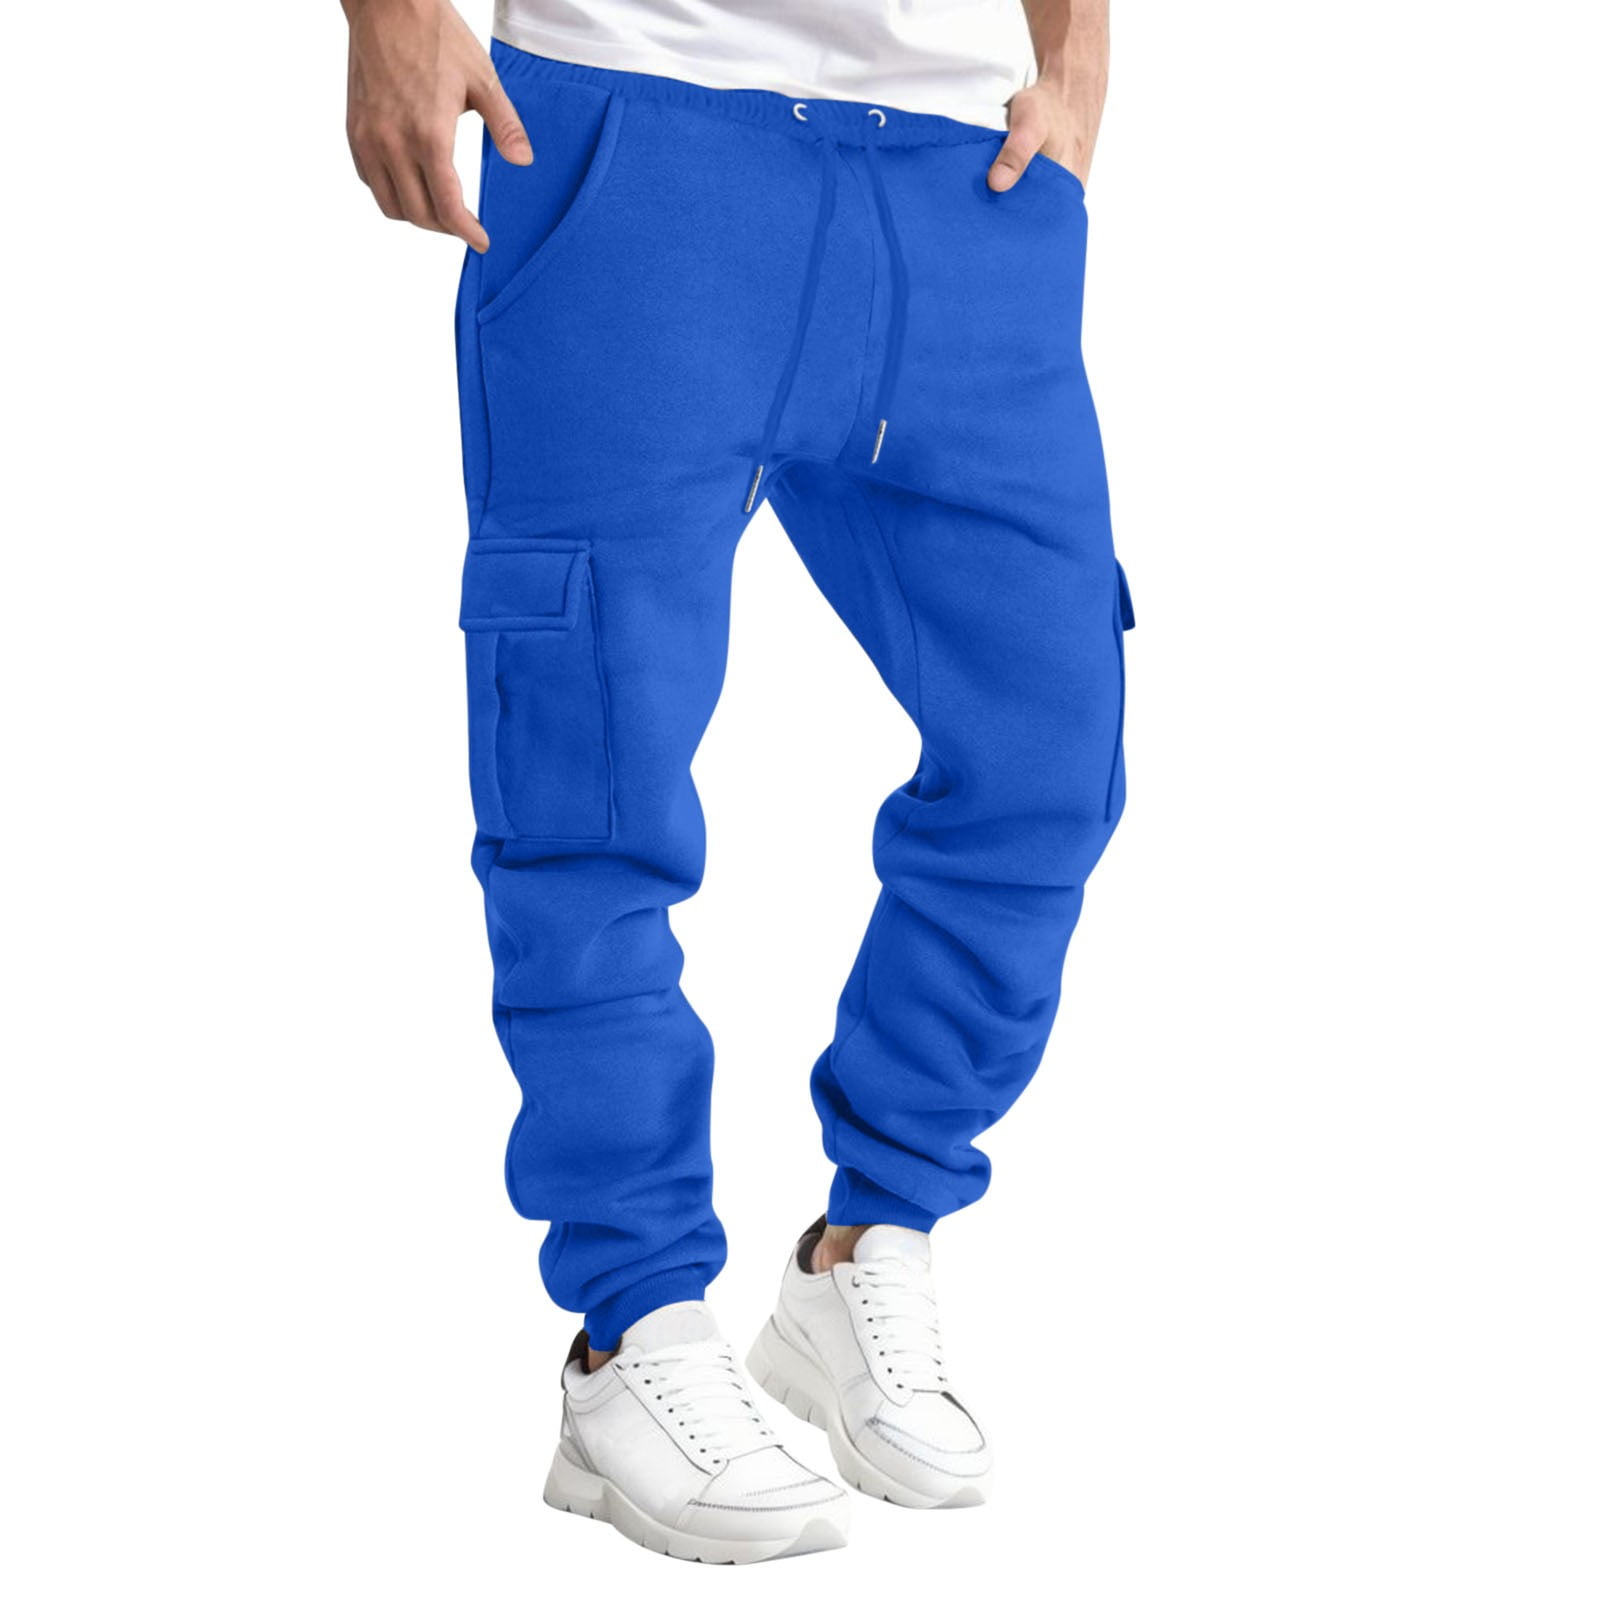 Blue Mens Graphic Sweatpants Comfortable Casual Fashionable And Warm ...